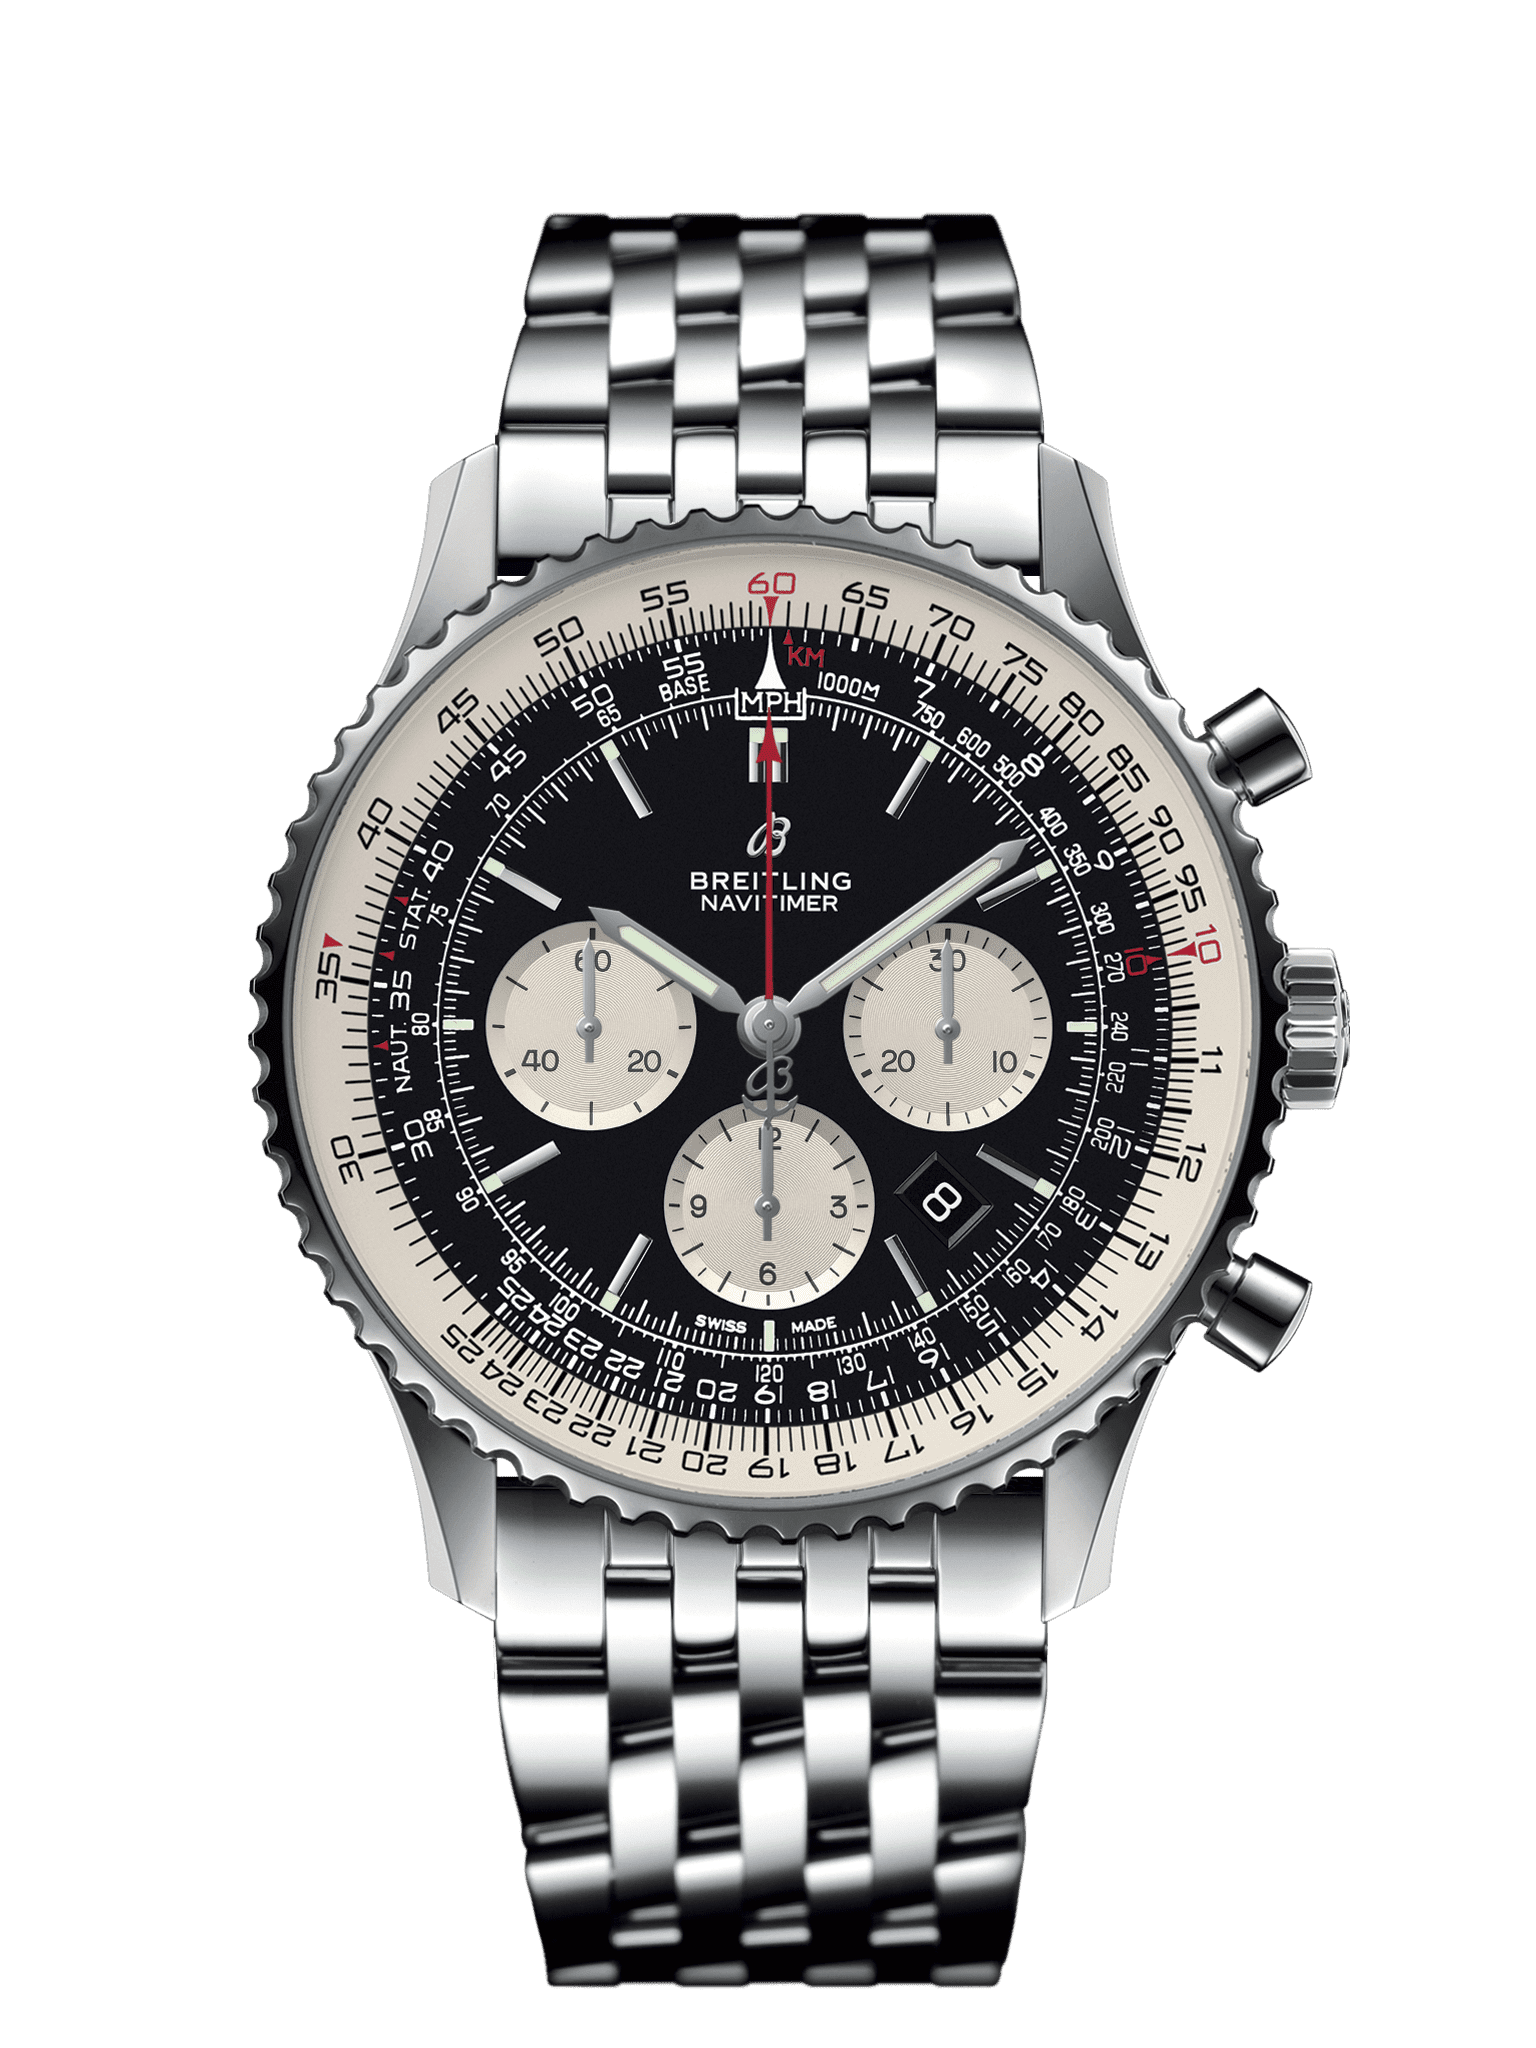 breitling Navitimer Reference 806 Tropical